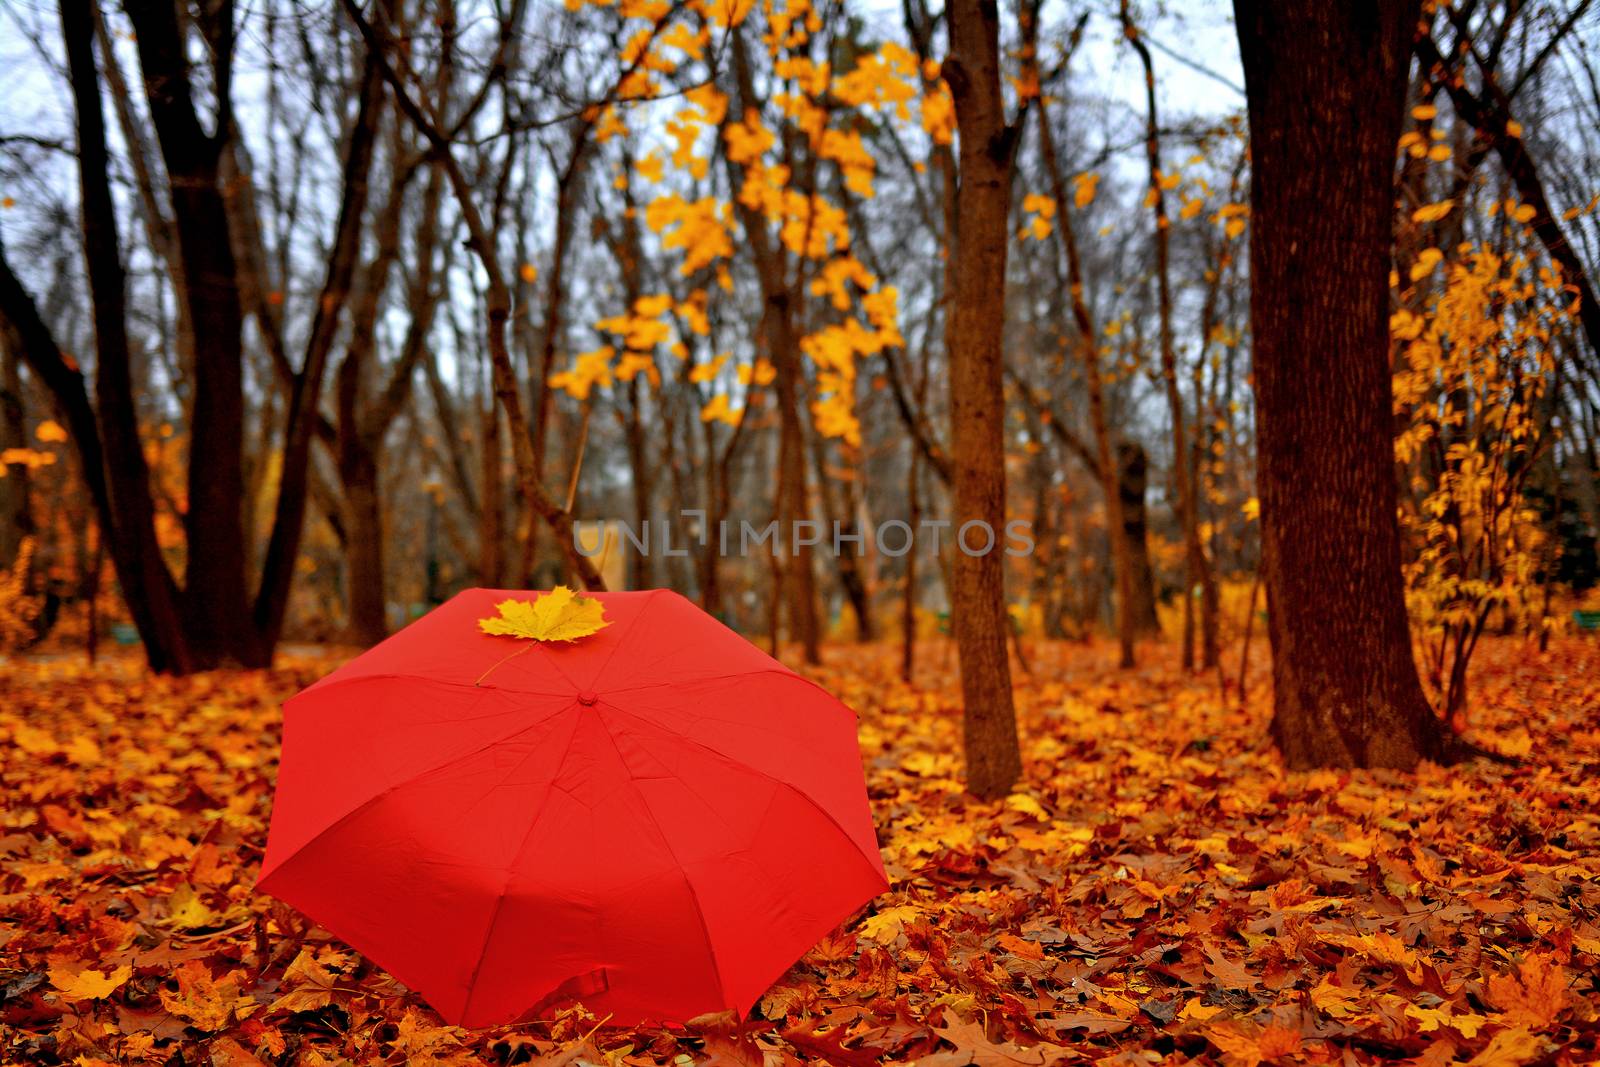 Autumn fall in the park with orange umbrella over withered yellow leaves..